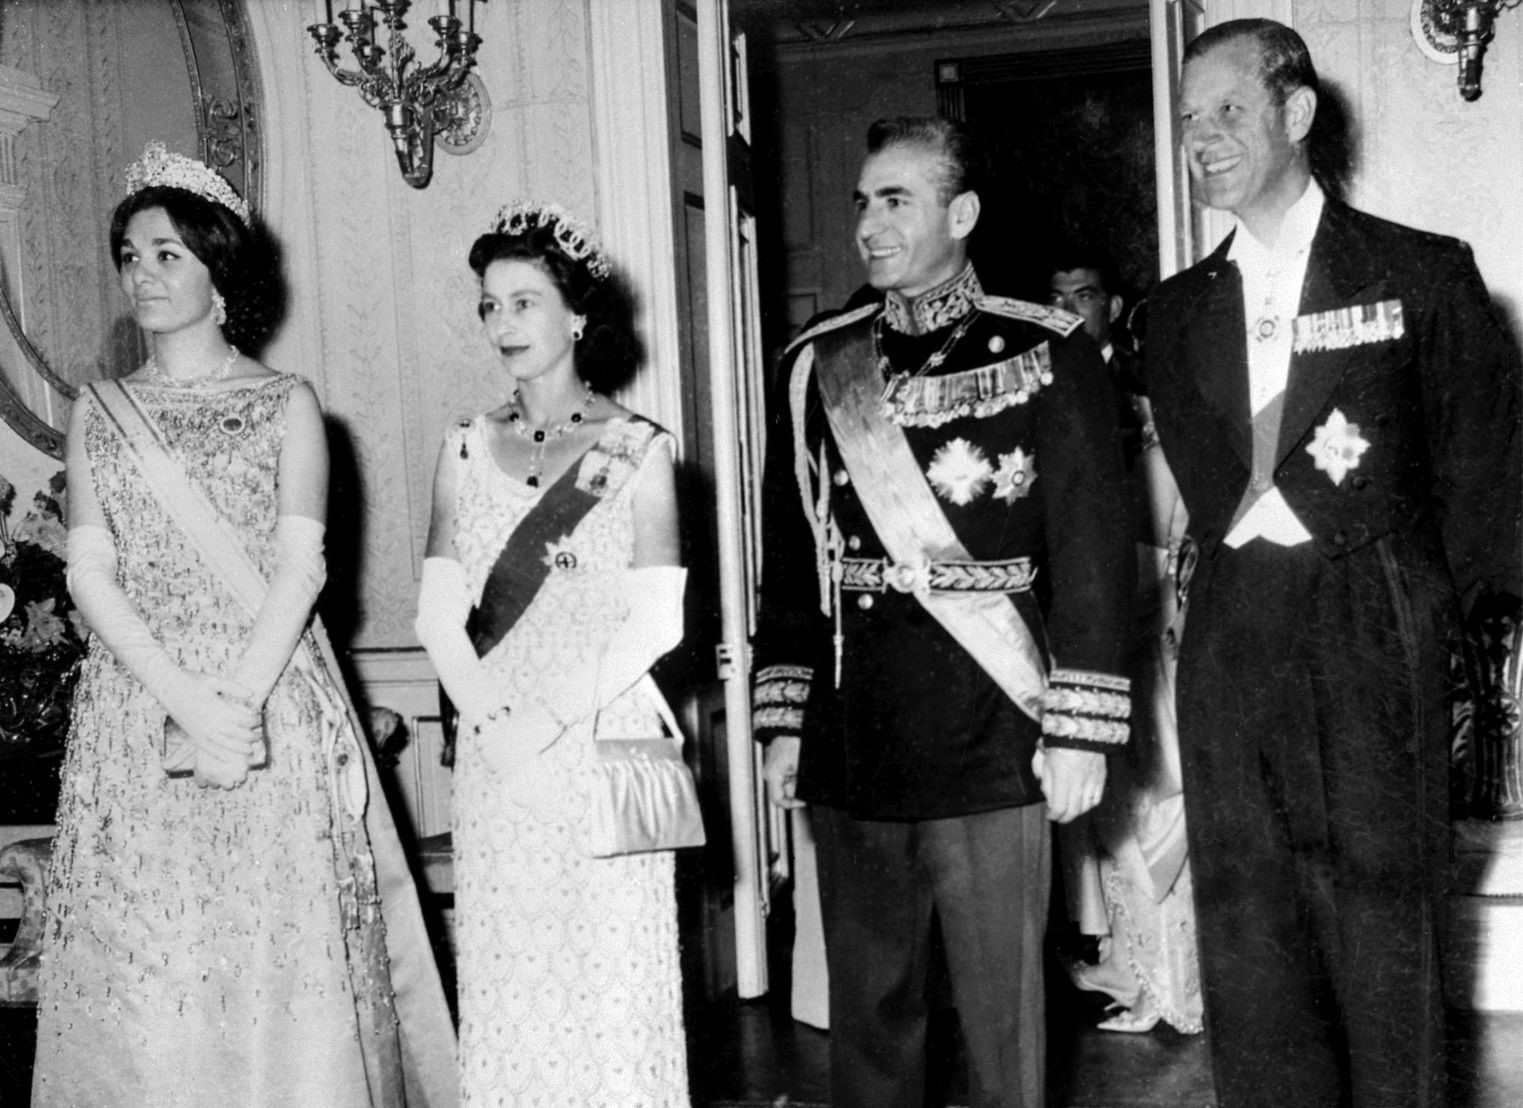 Queen Elizabeth II and the Prince Philip pose with Iran's Shah Mohammad Reza Pahlavi and his wife Farah Pahlavi during their state visit, March 1961 in Tehran (AFP)